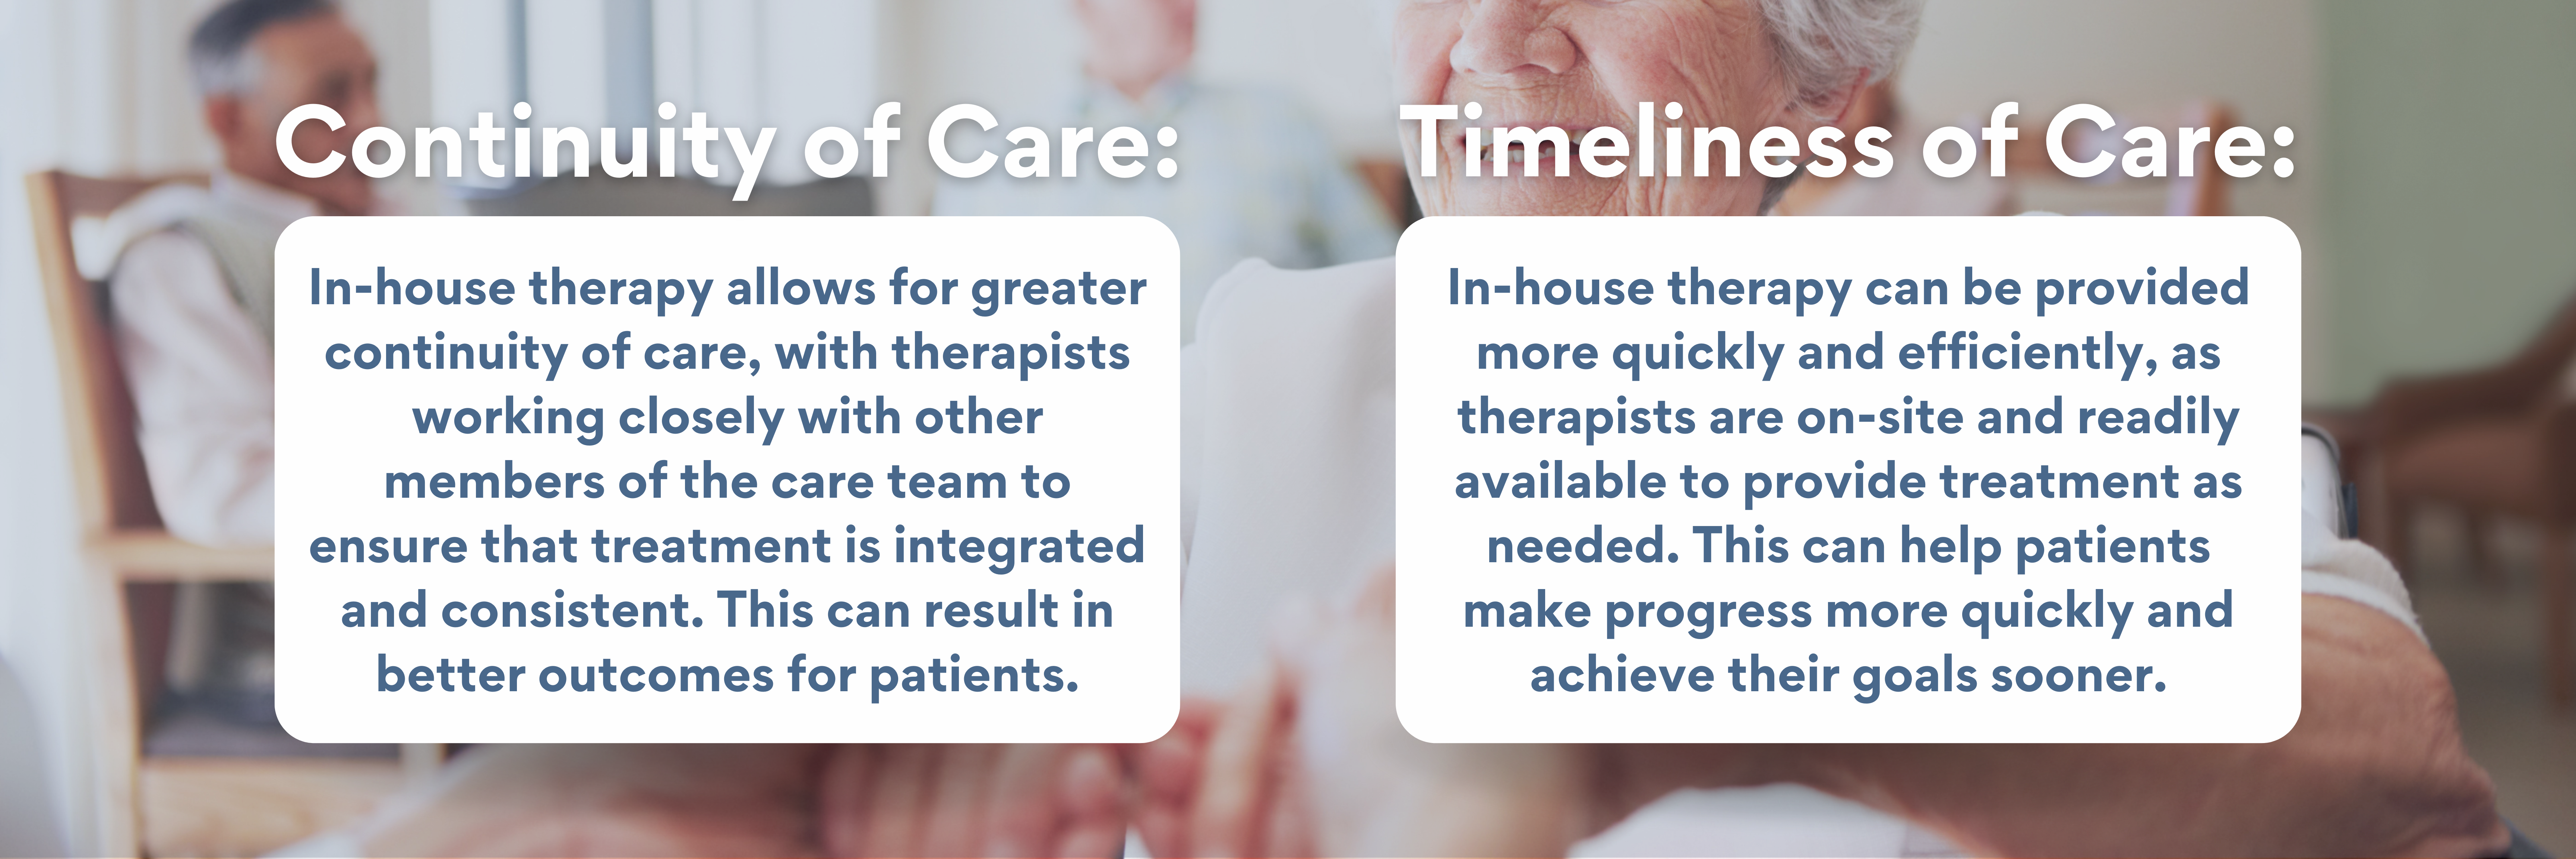 In-House Occupational Therapy provides both continuity and timeliness of care.